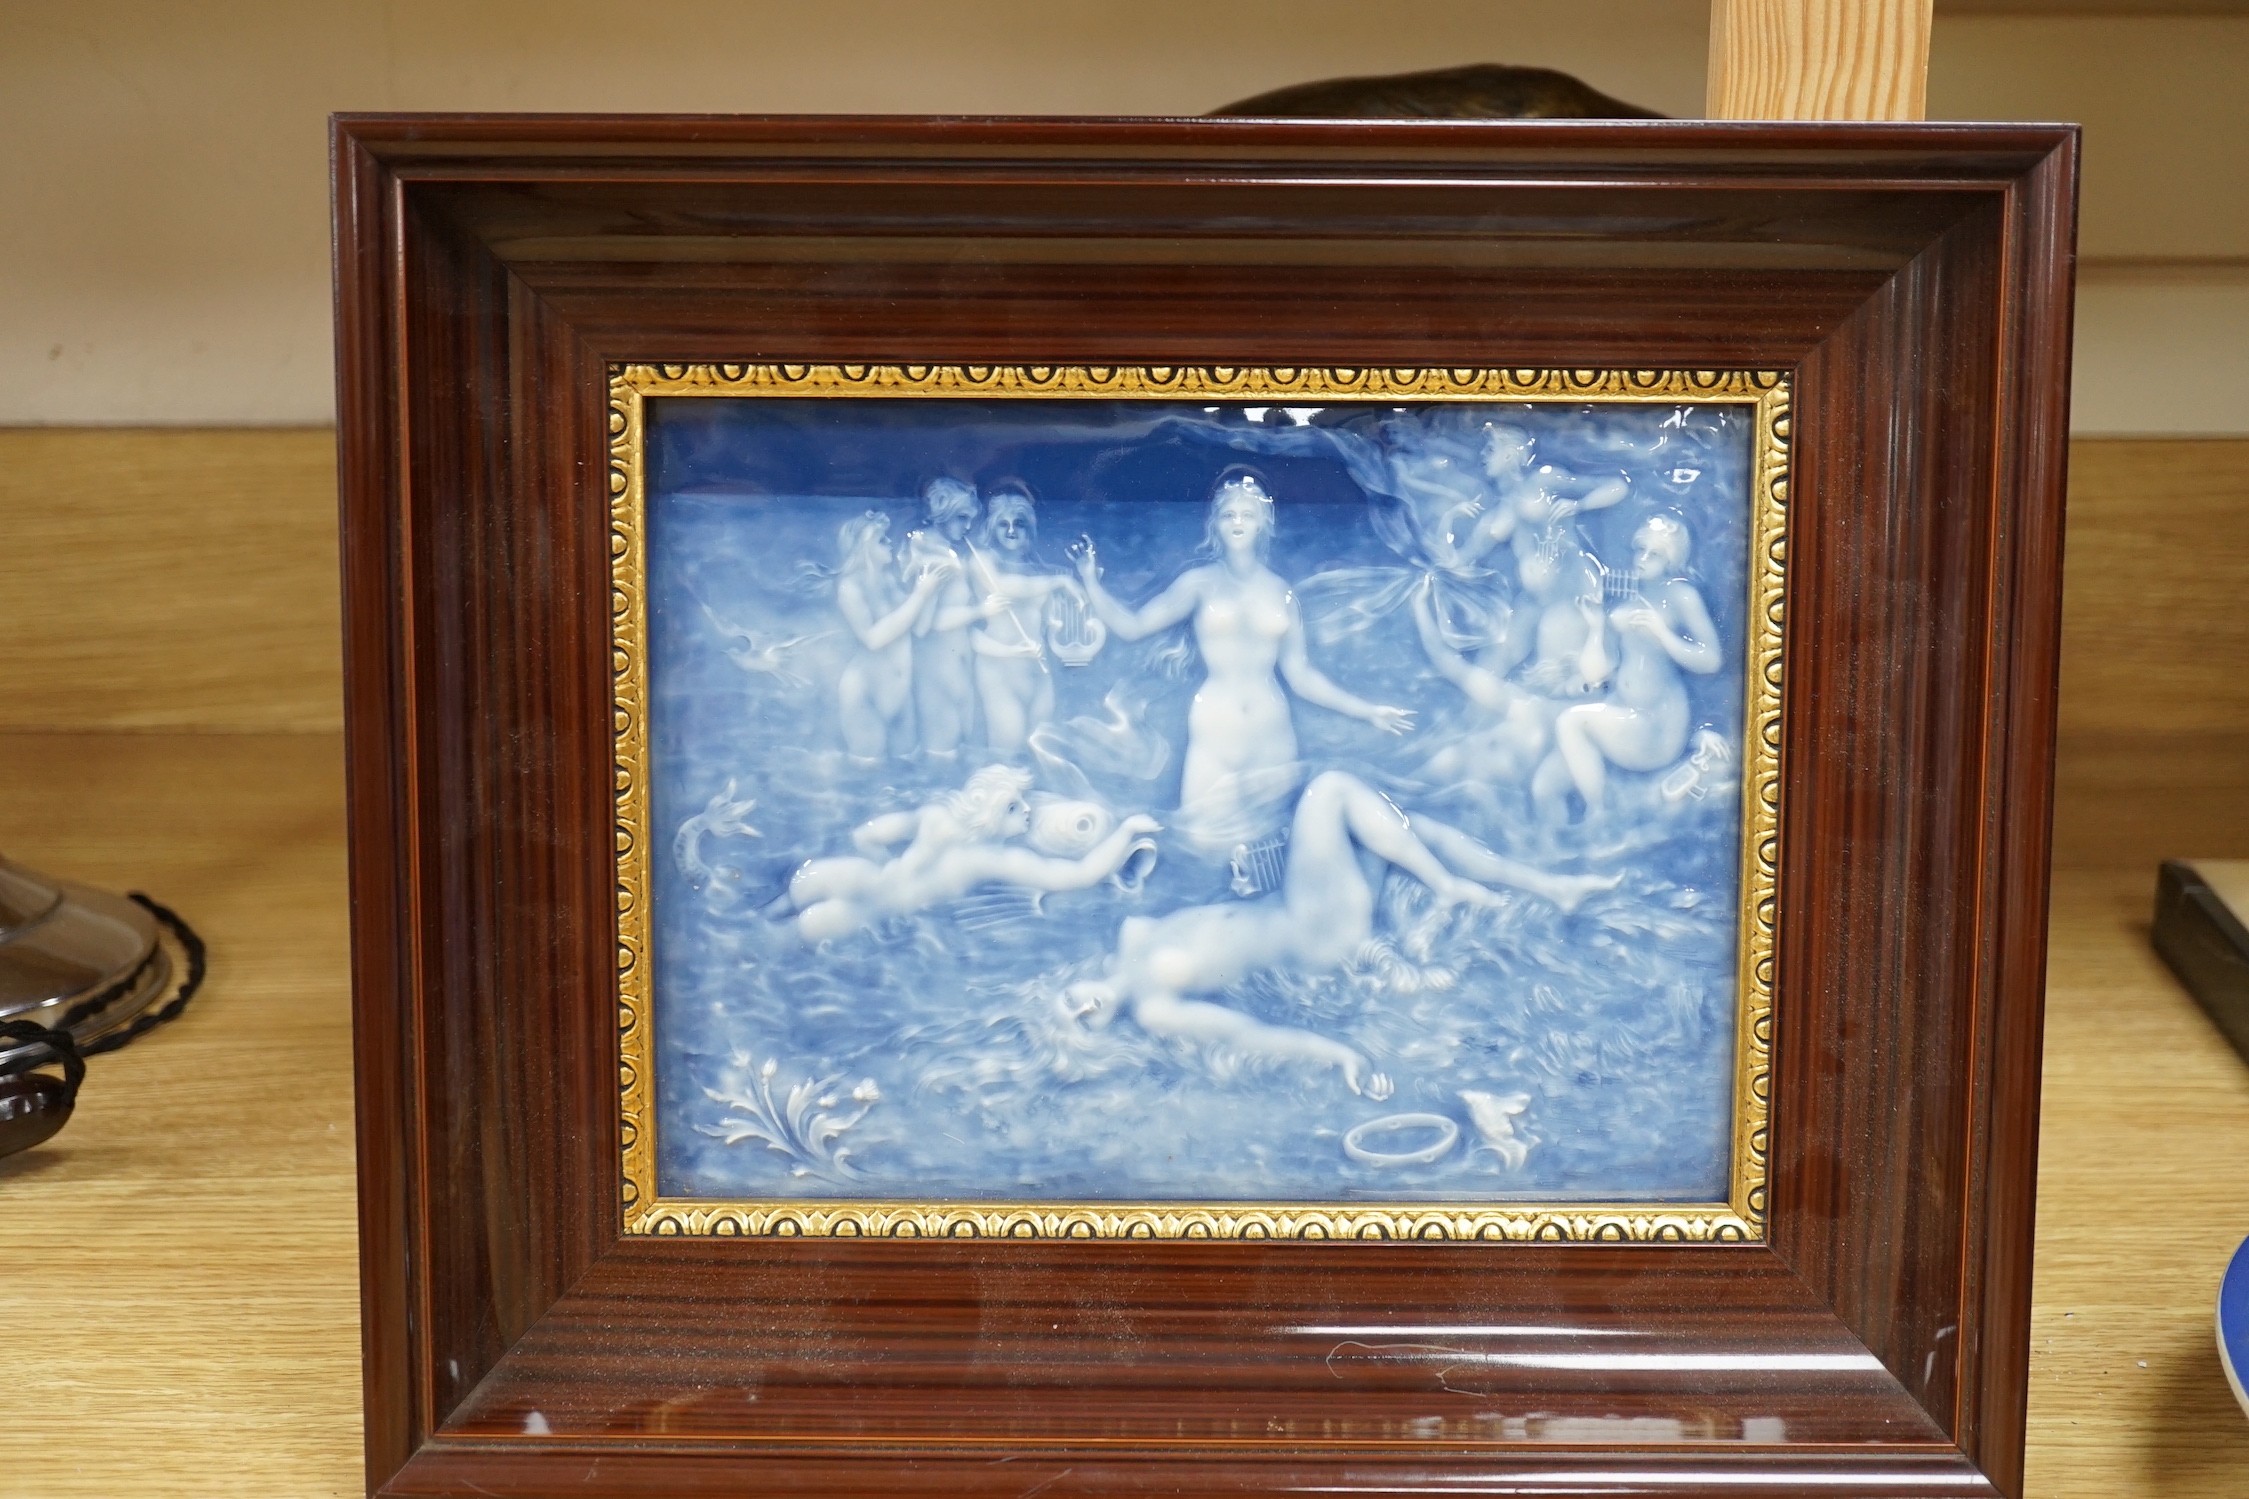 A Limoges style pate sur pate plaque, early 20th century, depicting sirens, plaque 17.5 X 23.5 cm excluding frame